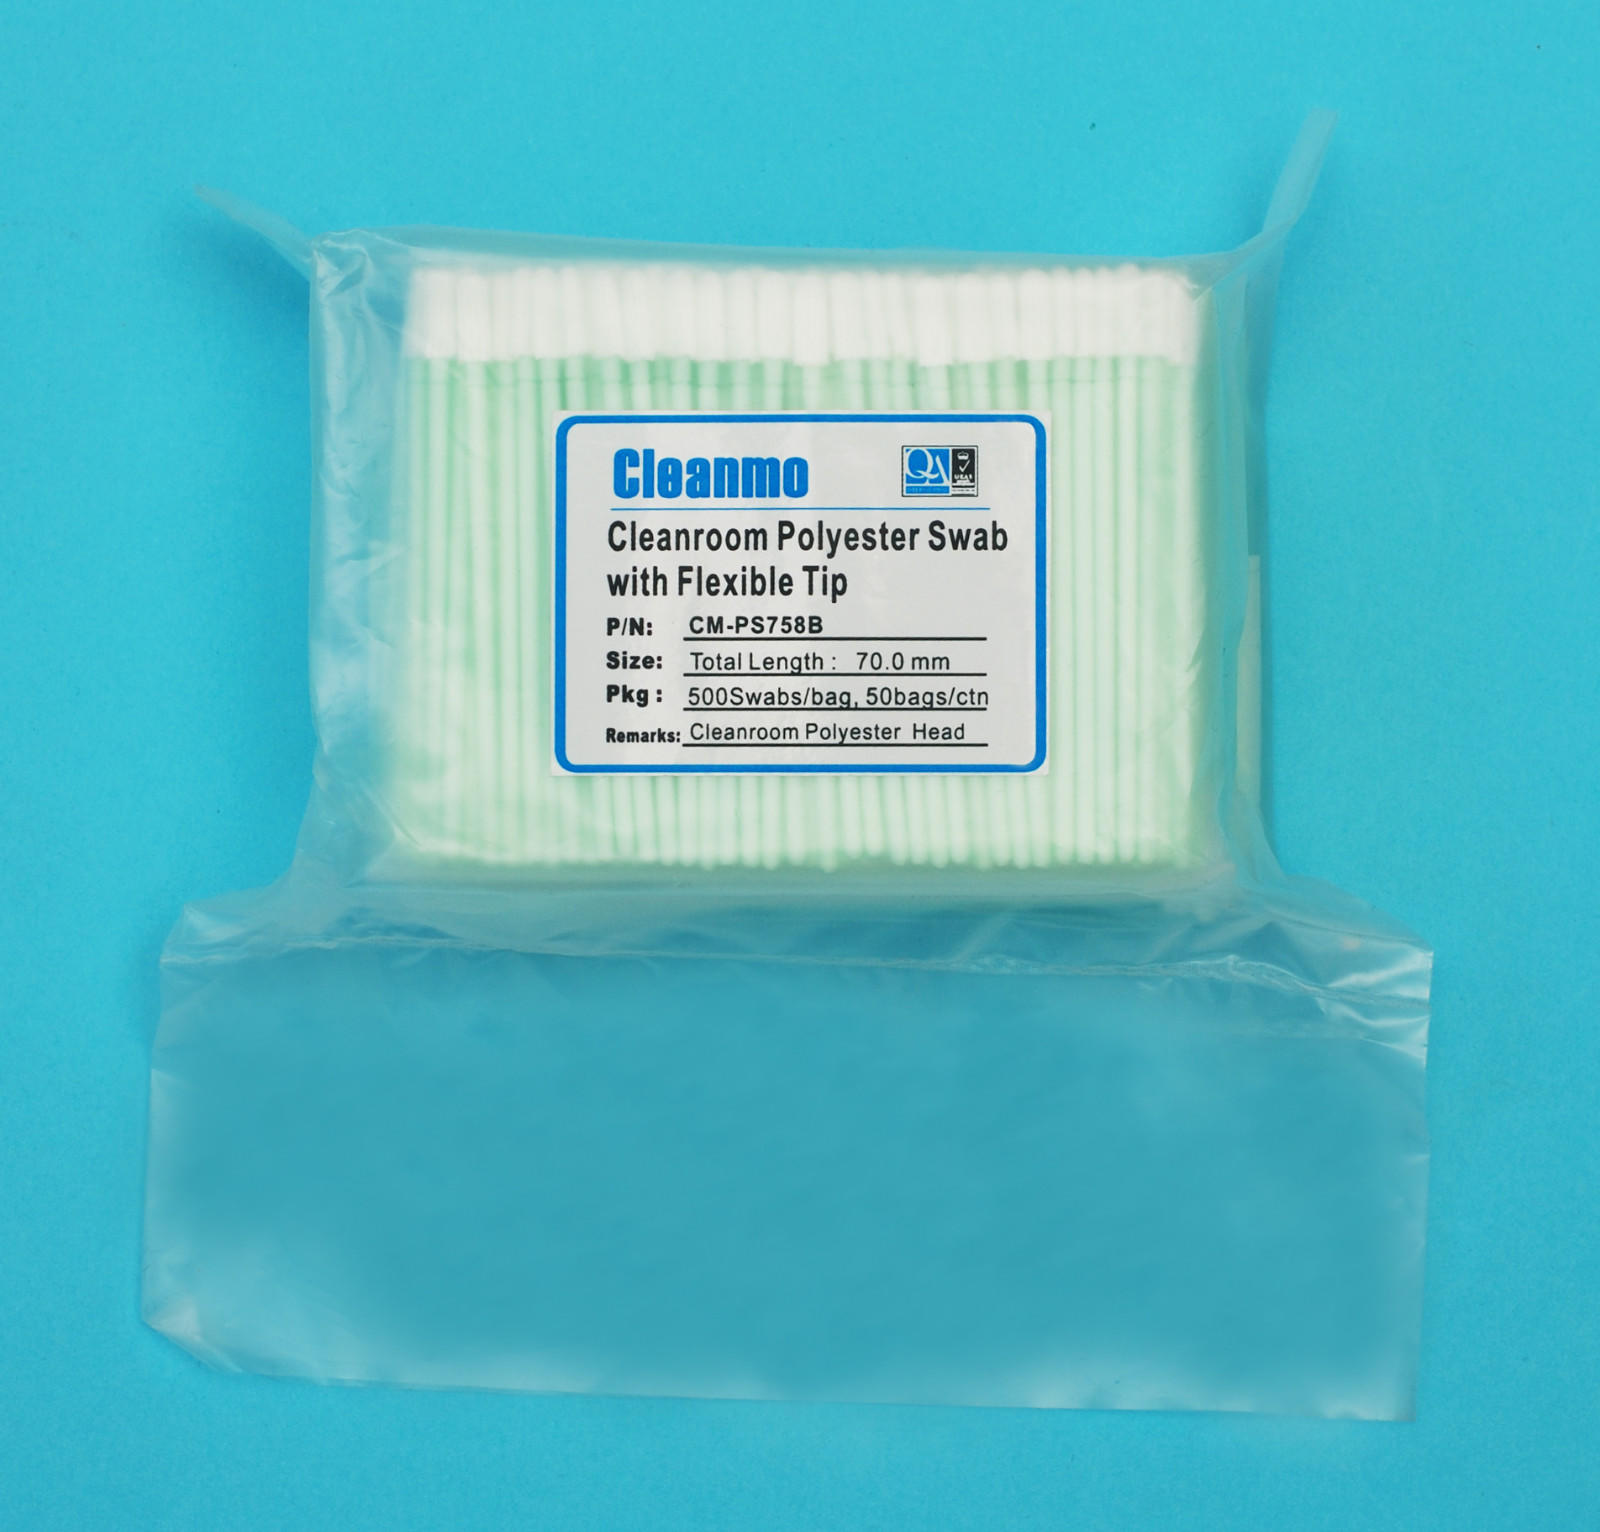 Cleanmo compatible dacron polyester swabs manufacturer for microscopes